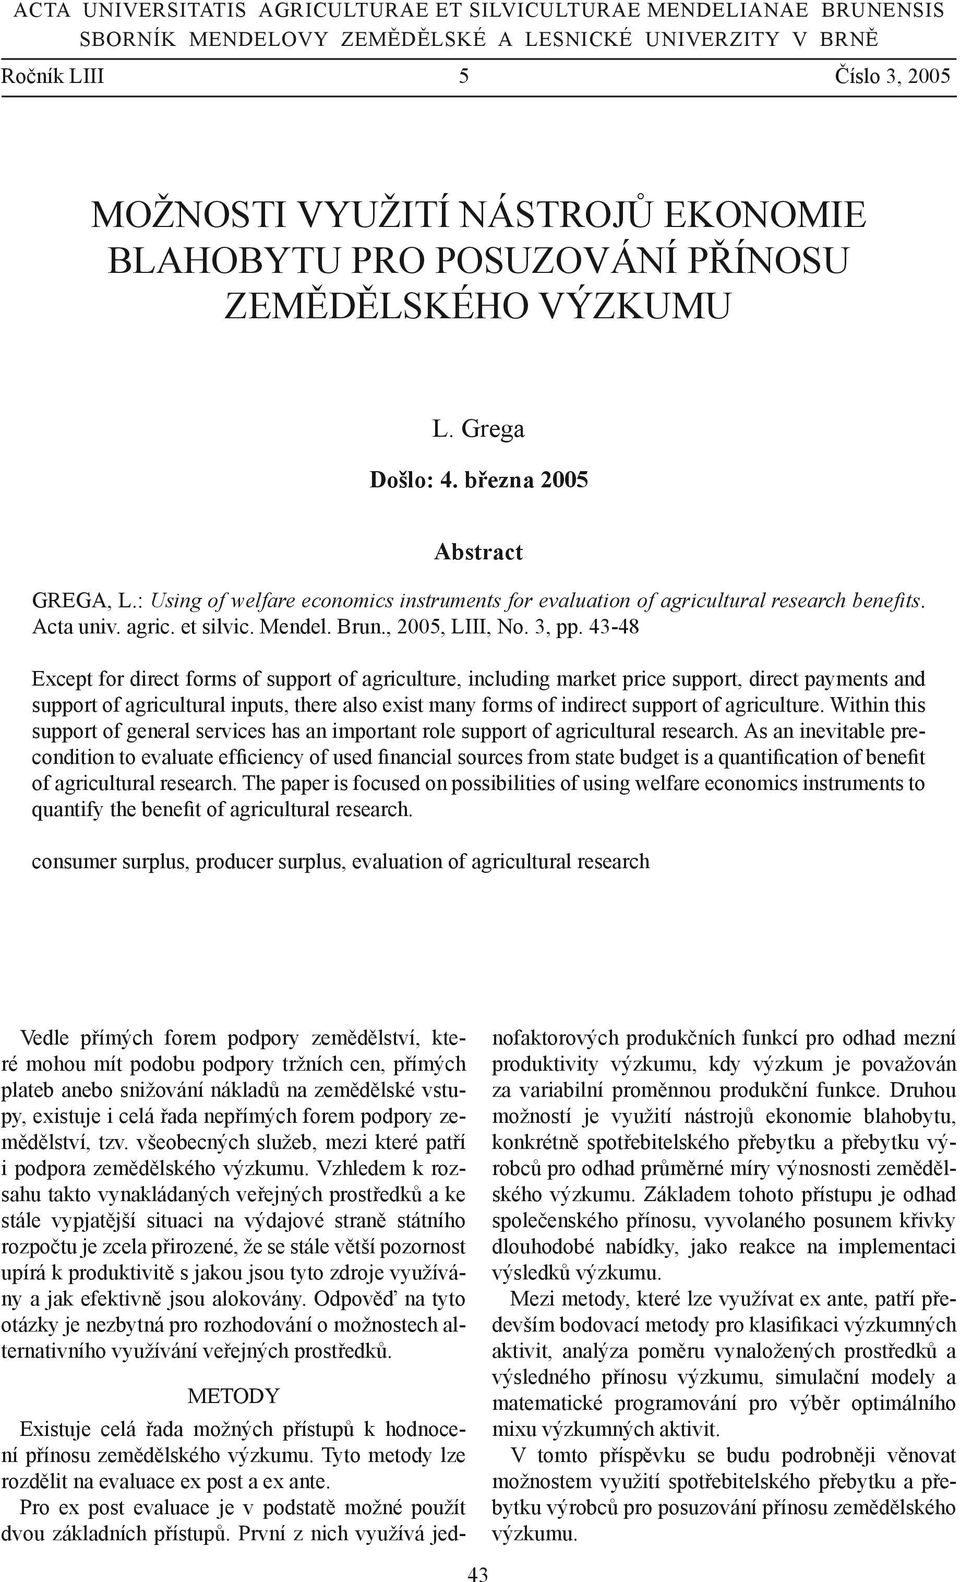 agric et silvic Mendel Brun, 2005, LIII, No 3, pp 43-48 Except for direct forms of support of agriculture, including market price support, direct payments and support of agricultural inputs, there